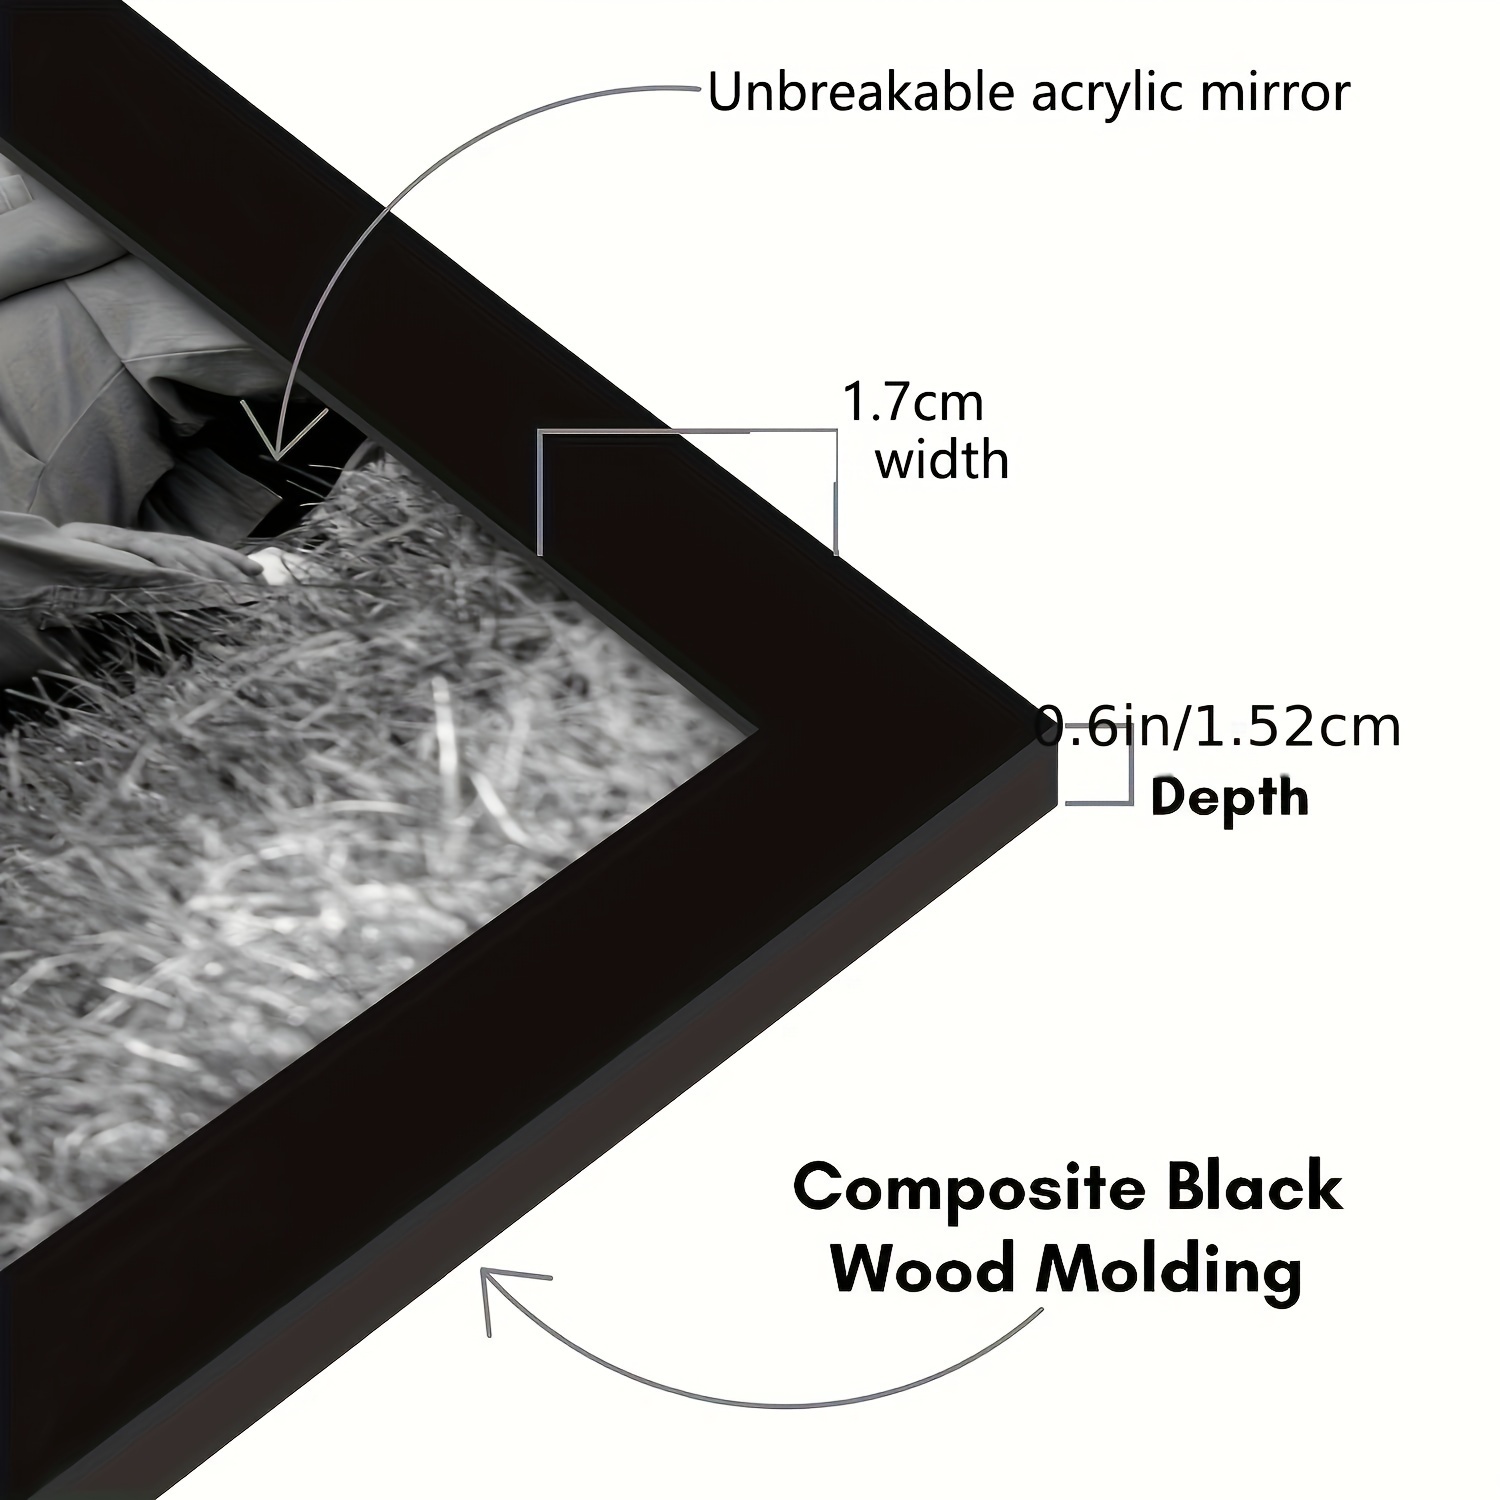 Black Picture Frames - 4x6 Wood Frame with Glass